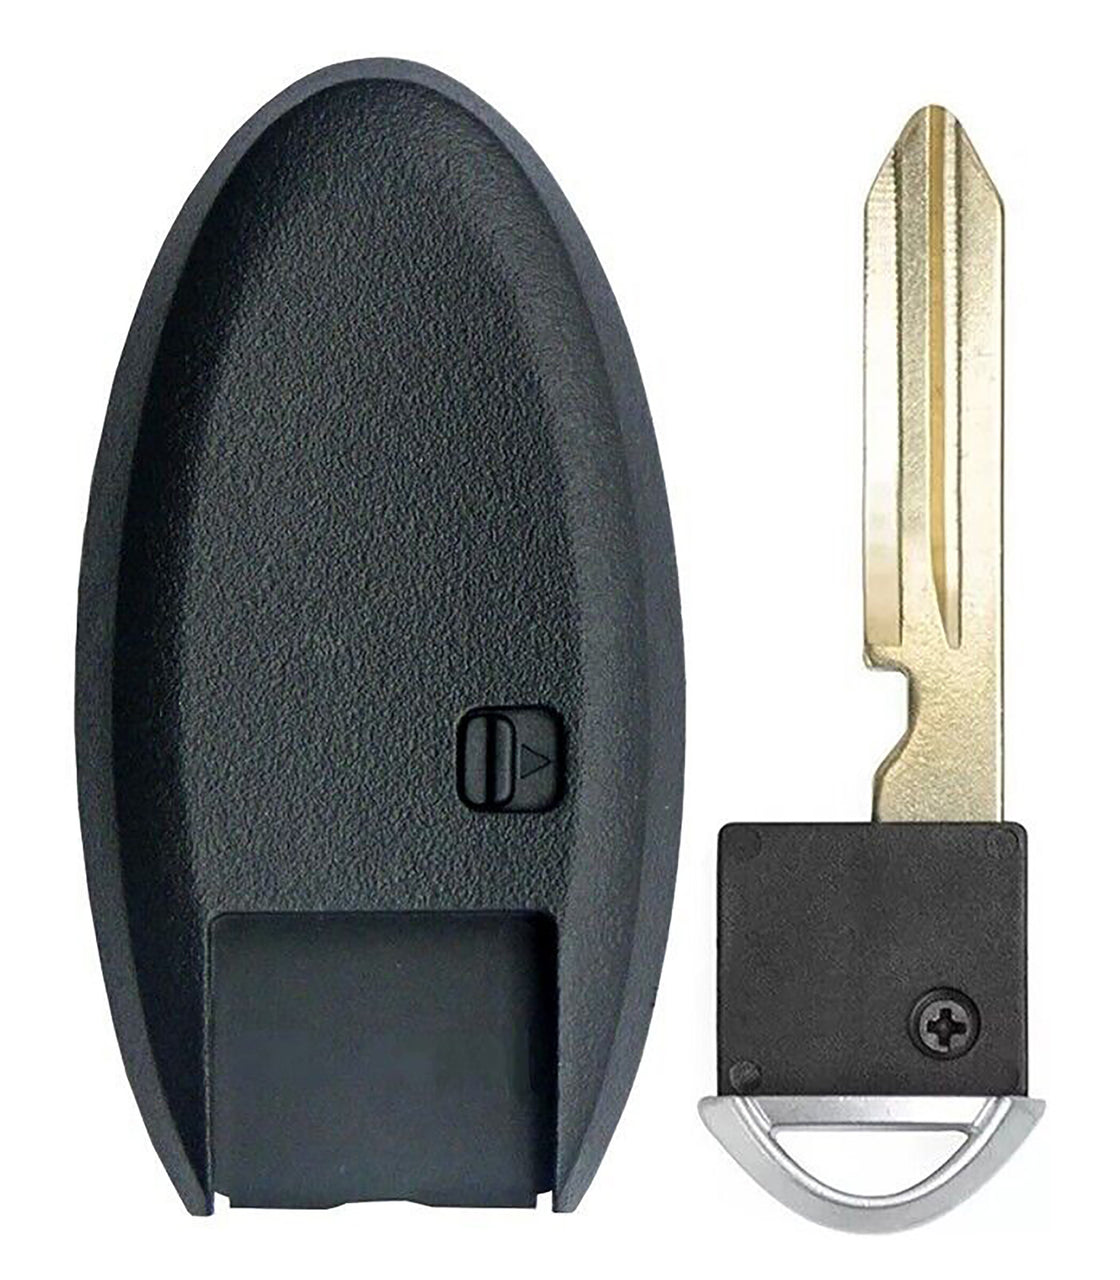 1x New Replacement Proximity Key Fob SHELL / CASE Compatible with & Fit For Nissan Vehicles - MPN KR5S180144014-106-04 (NO electronics or Chip inside)